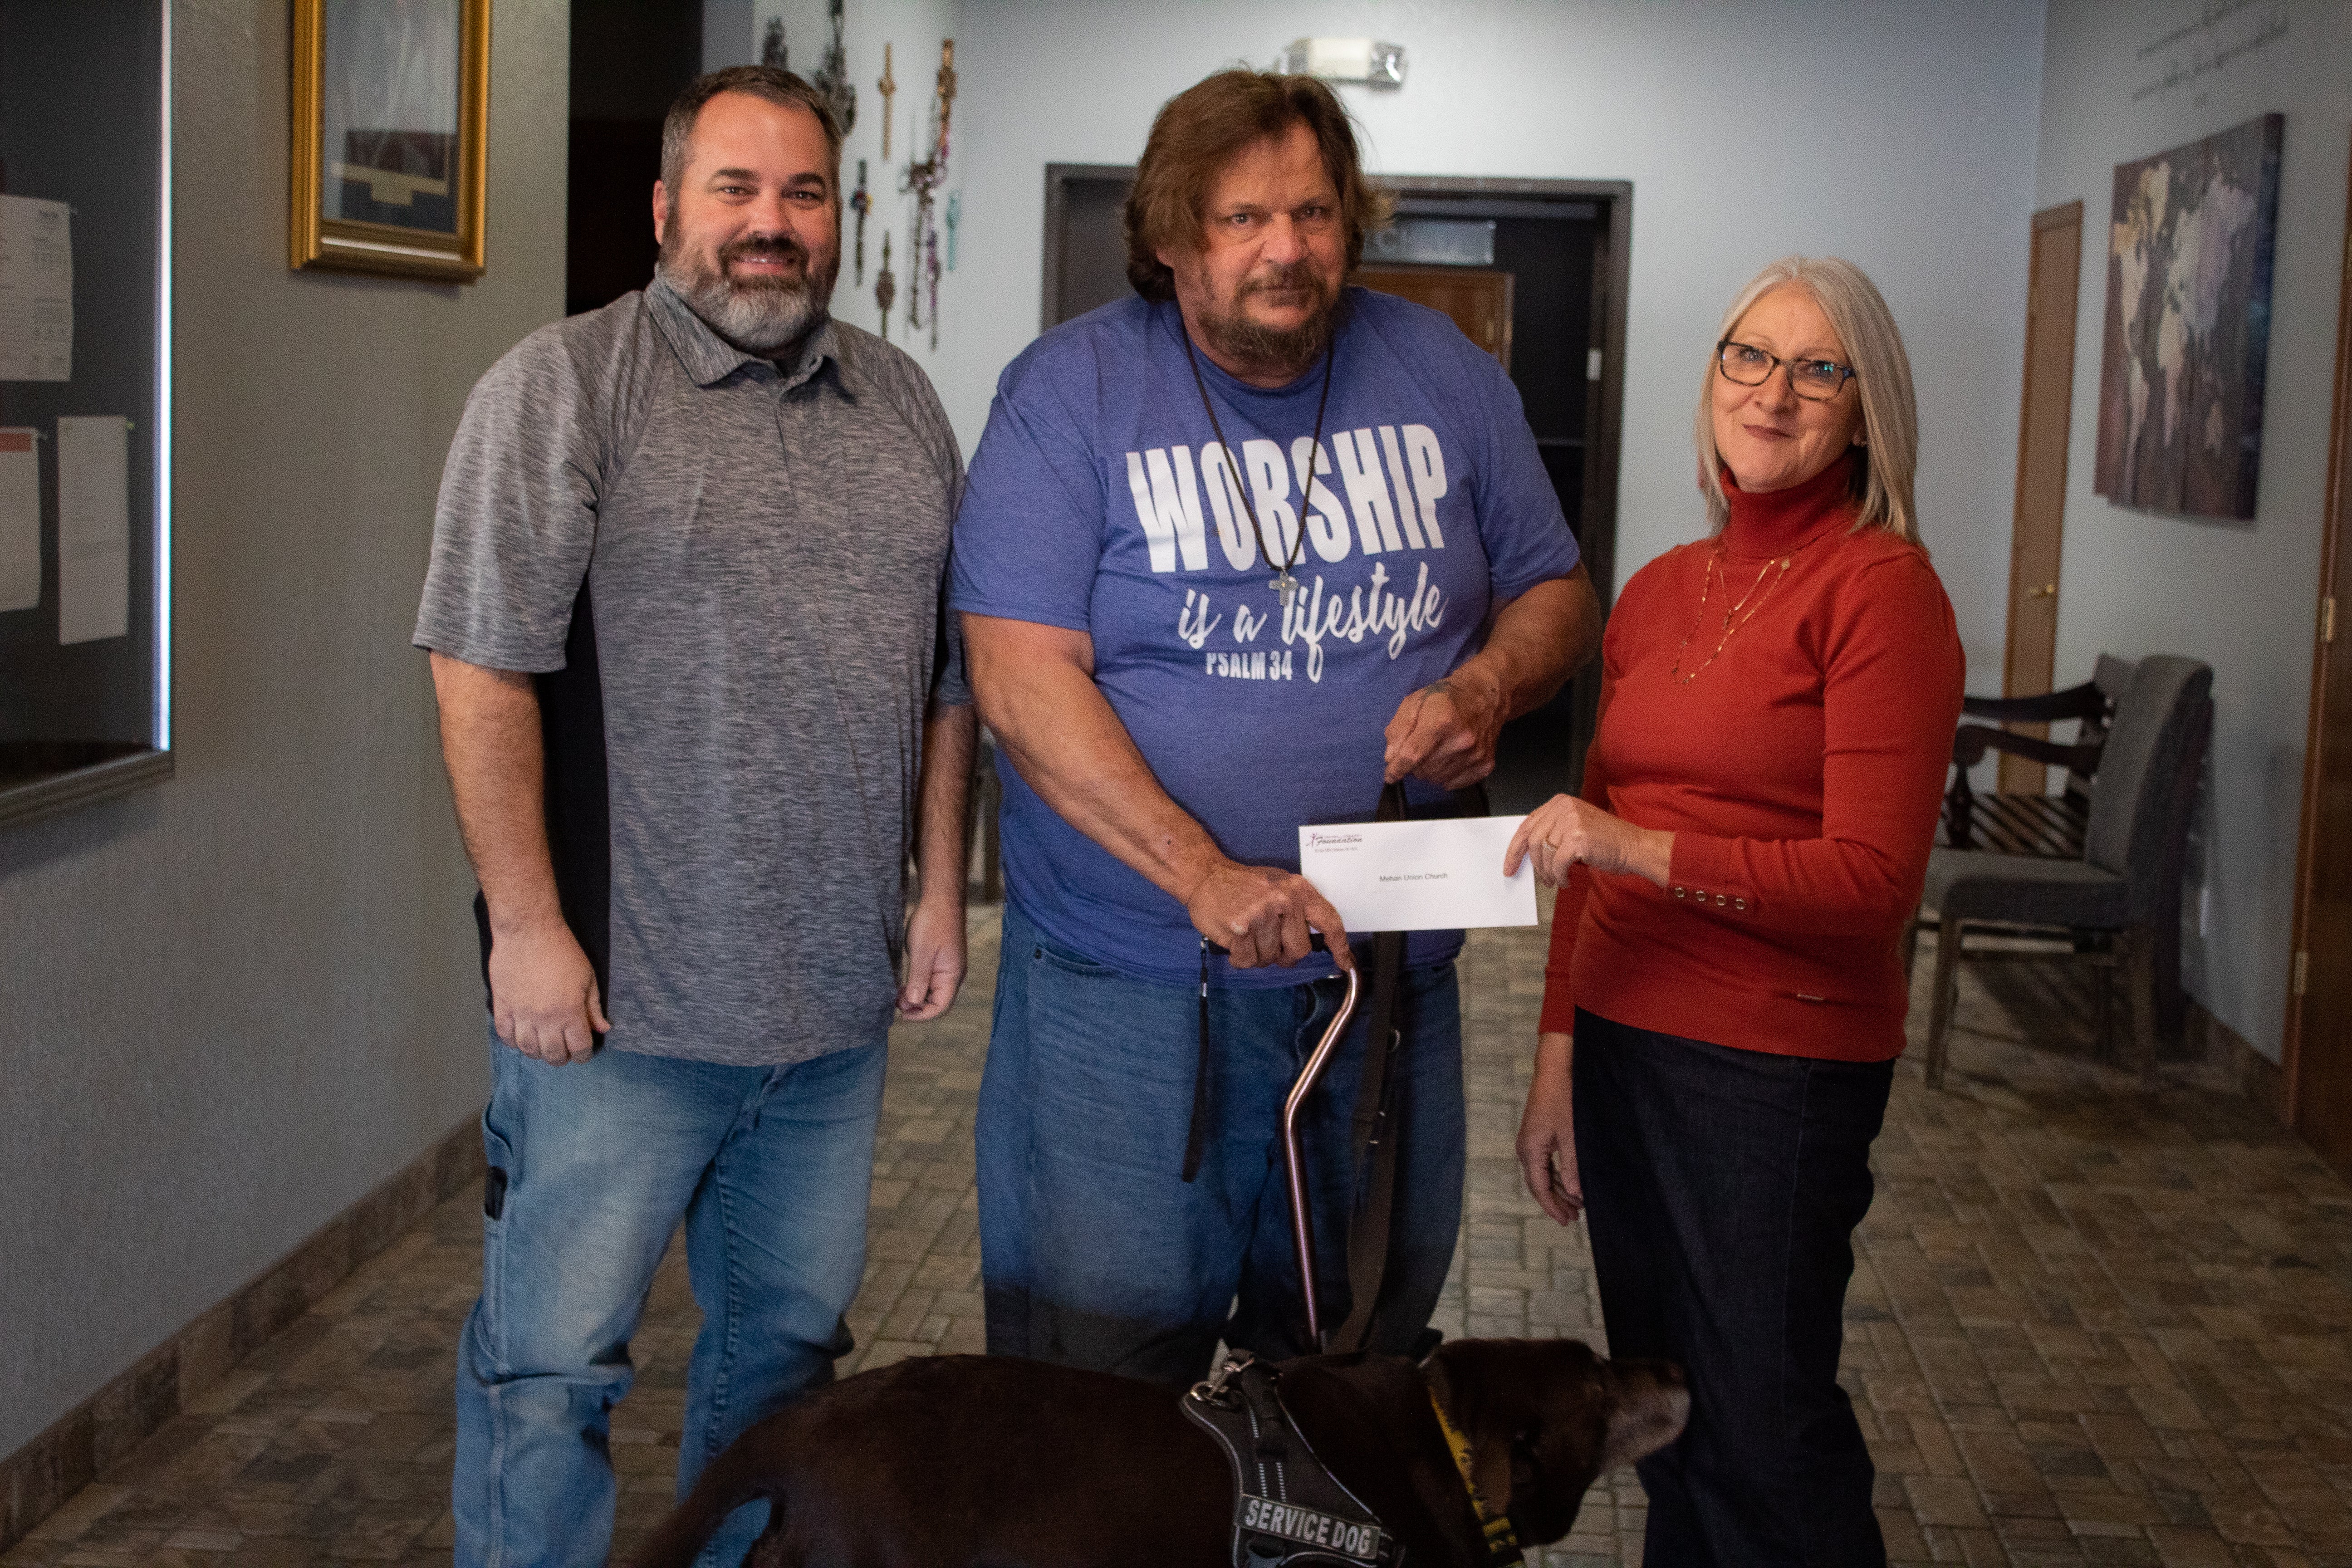 (From left to right) Mehan Union Church lead pastor, Jeff Eskelson, and volunteer, Toby Tiner, receive a grant from Central Community Foundation board member Gail Cookerly.